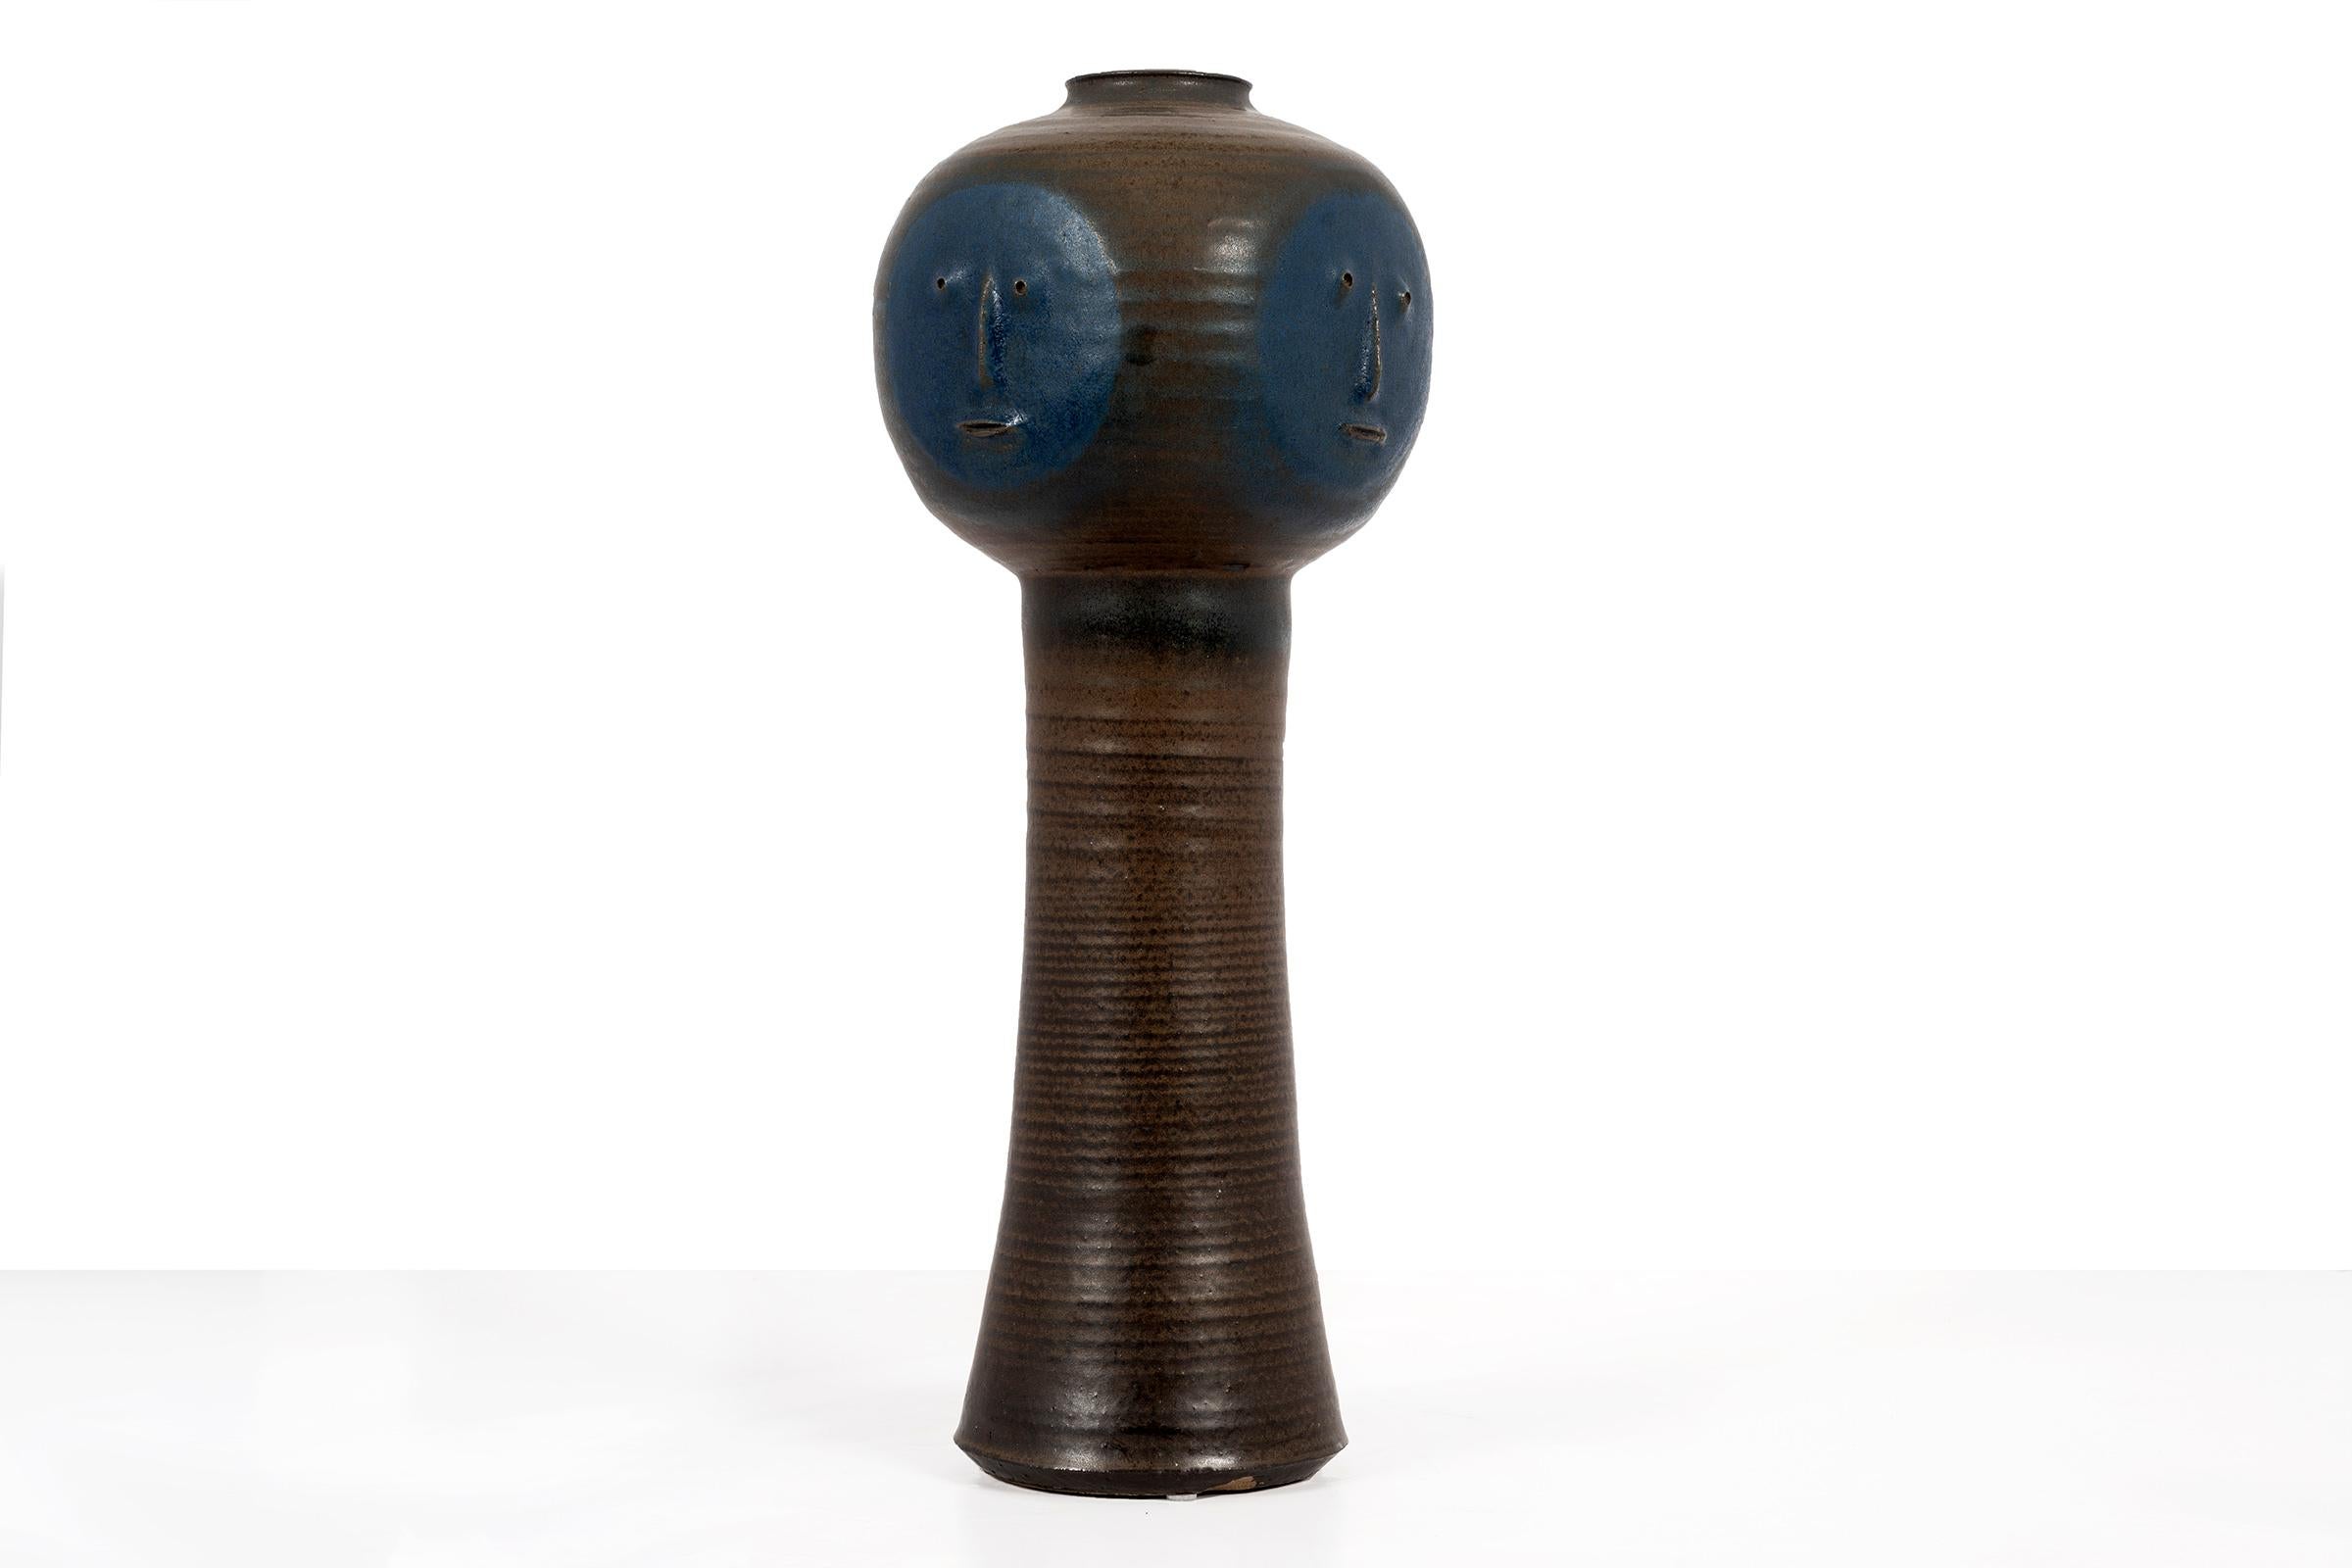 Clyde Burt stylized face vase in glazed stoneware with manipulated and applied facial details.
Signed to underside: [CB].
American, circa 1965.